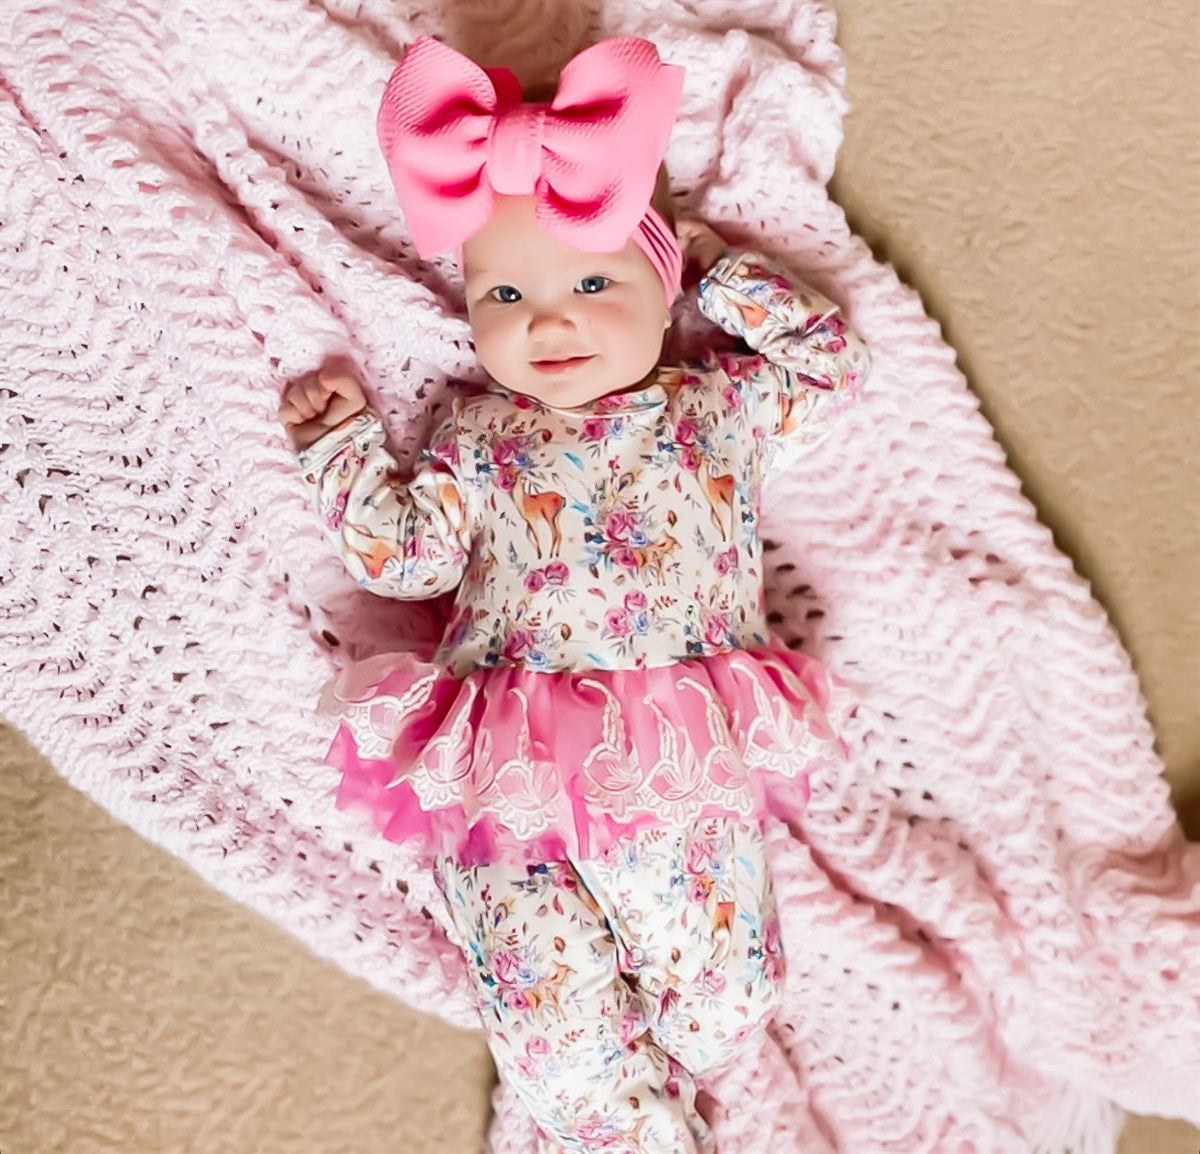 child wearing the Kryssi Kouture Sienna Holiday Infant Deluxe Tutu Jumpsuit - Deer Flora - Tutu. With a pink bow.